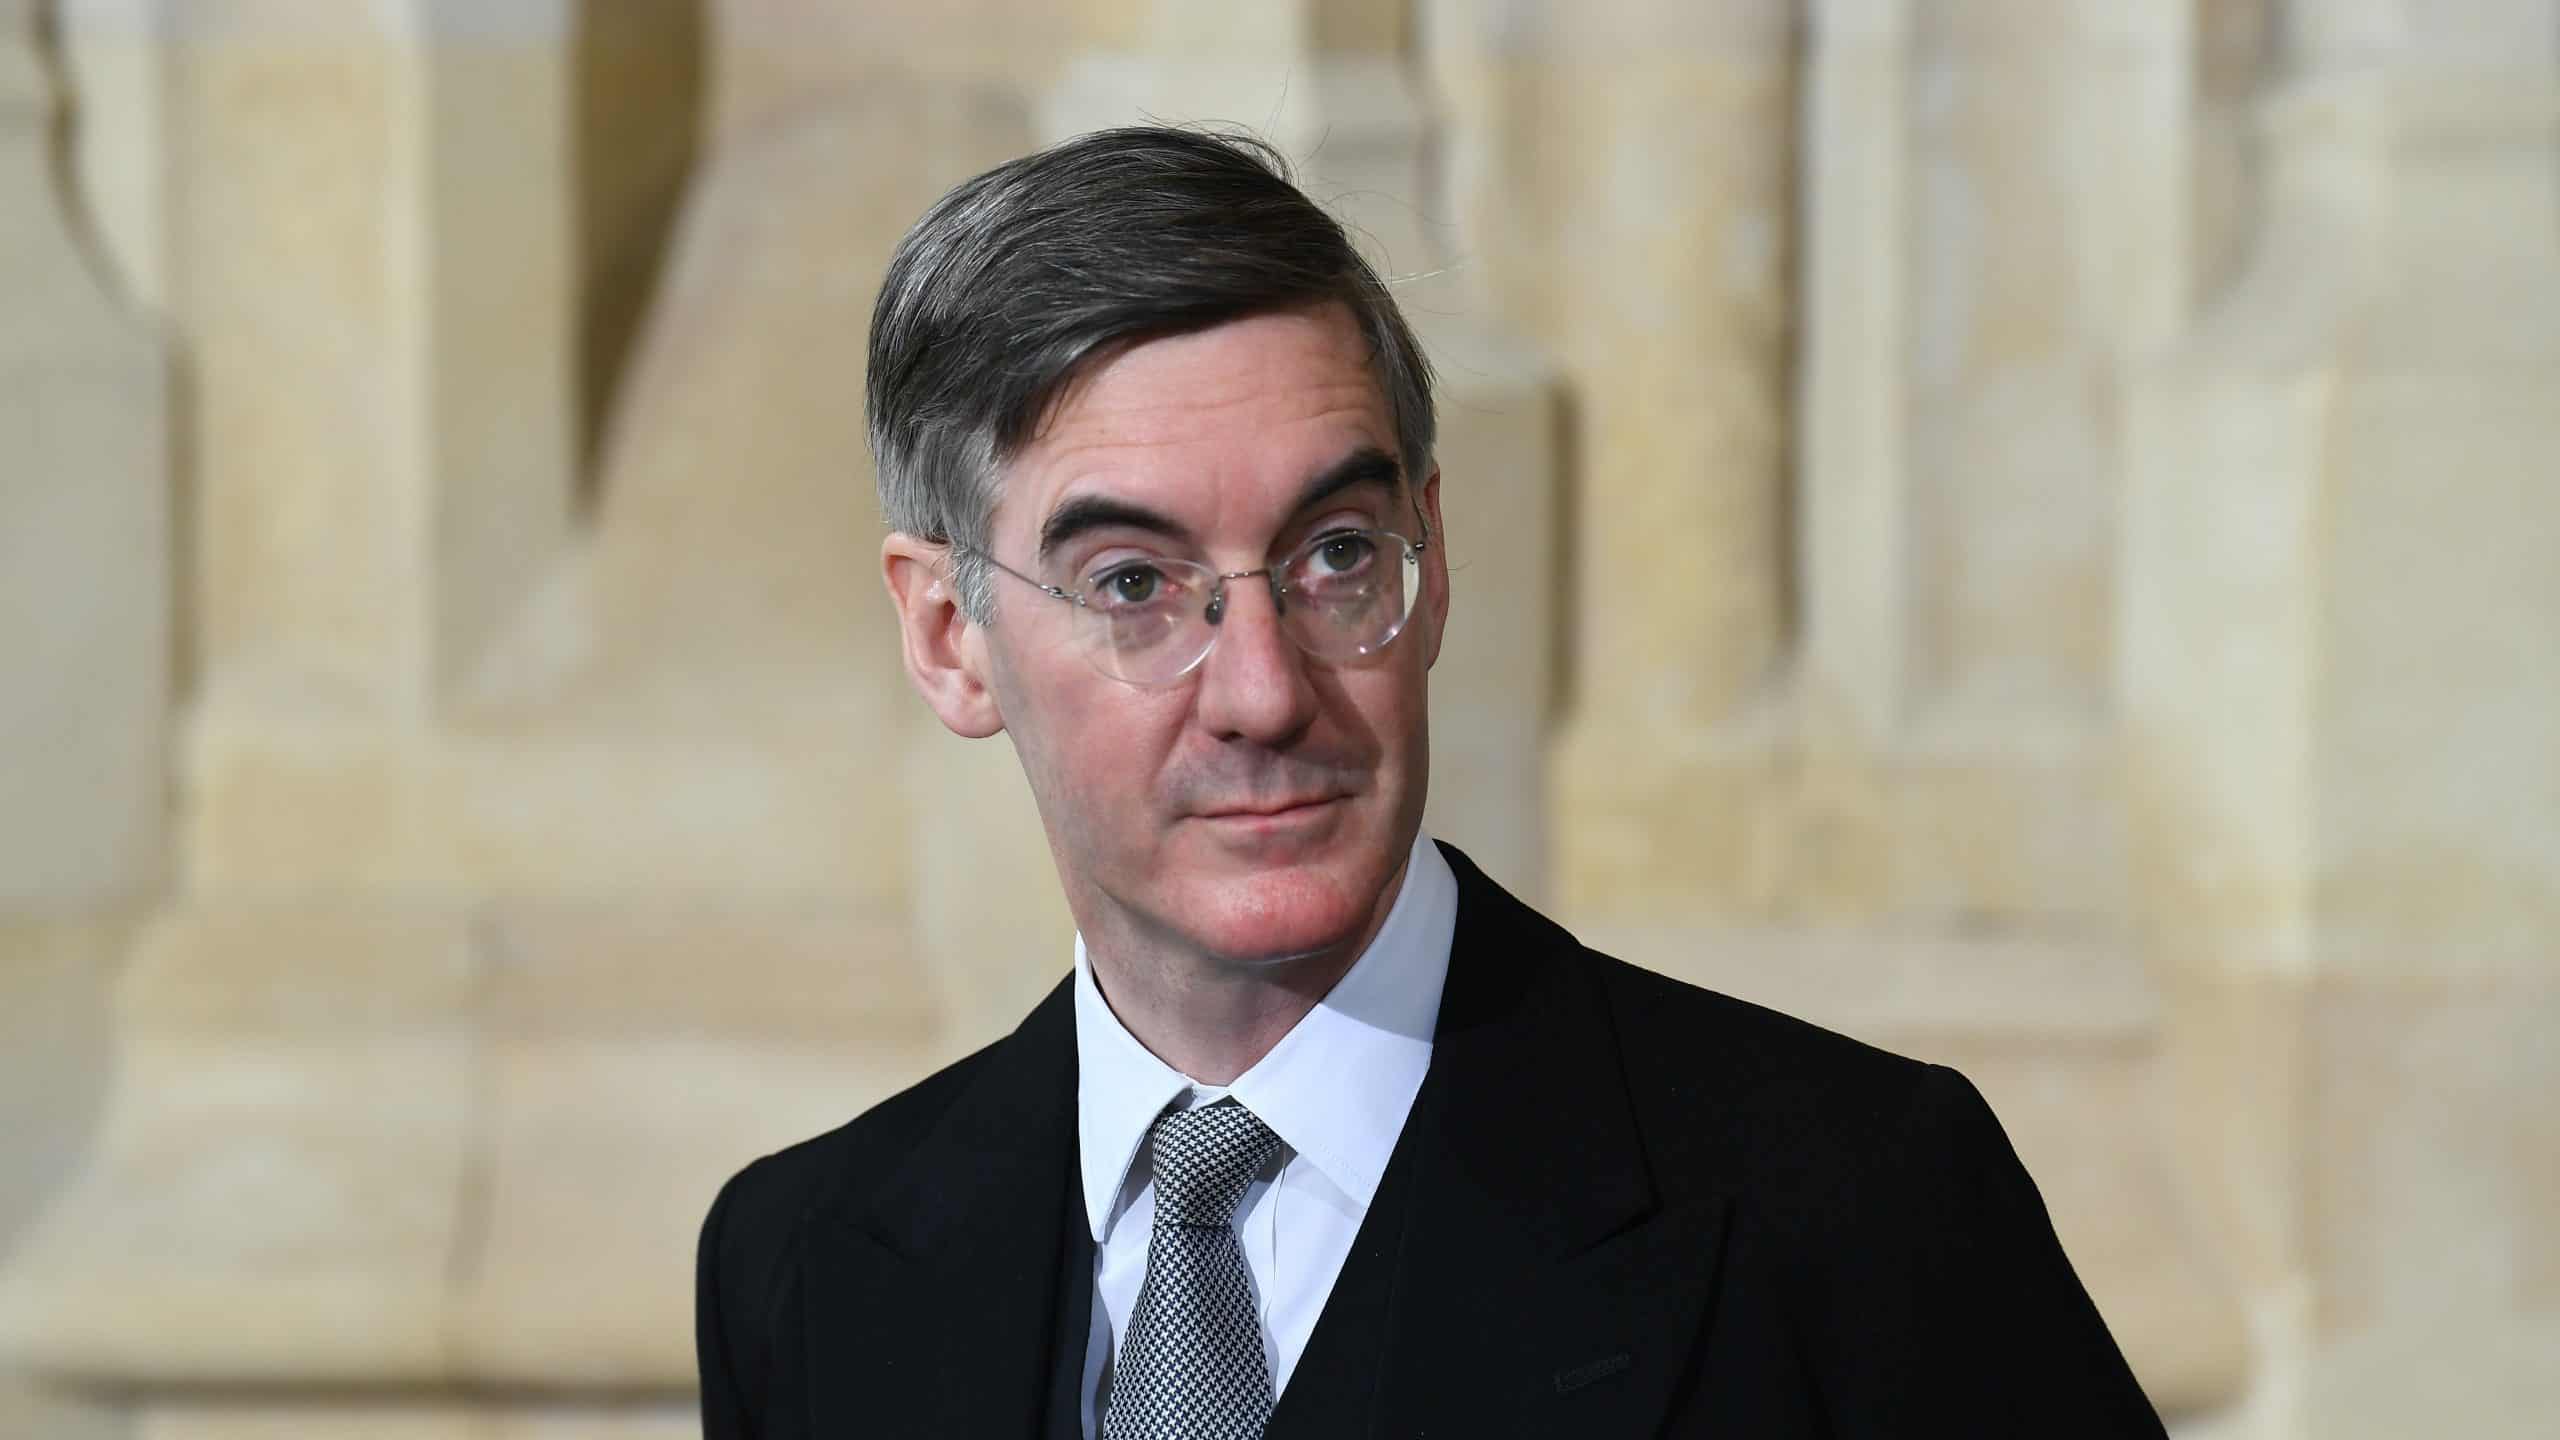 ‘It’s 2021 not 1821’: Rees-Mogg accused of racism over Commons comments